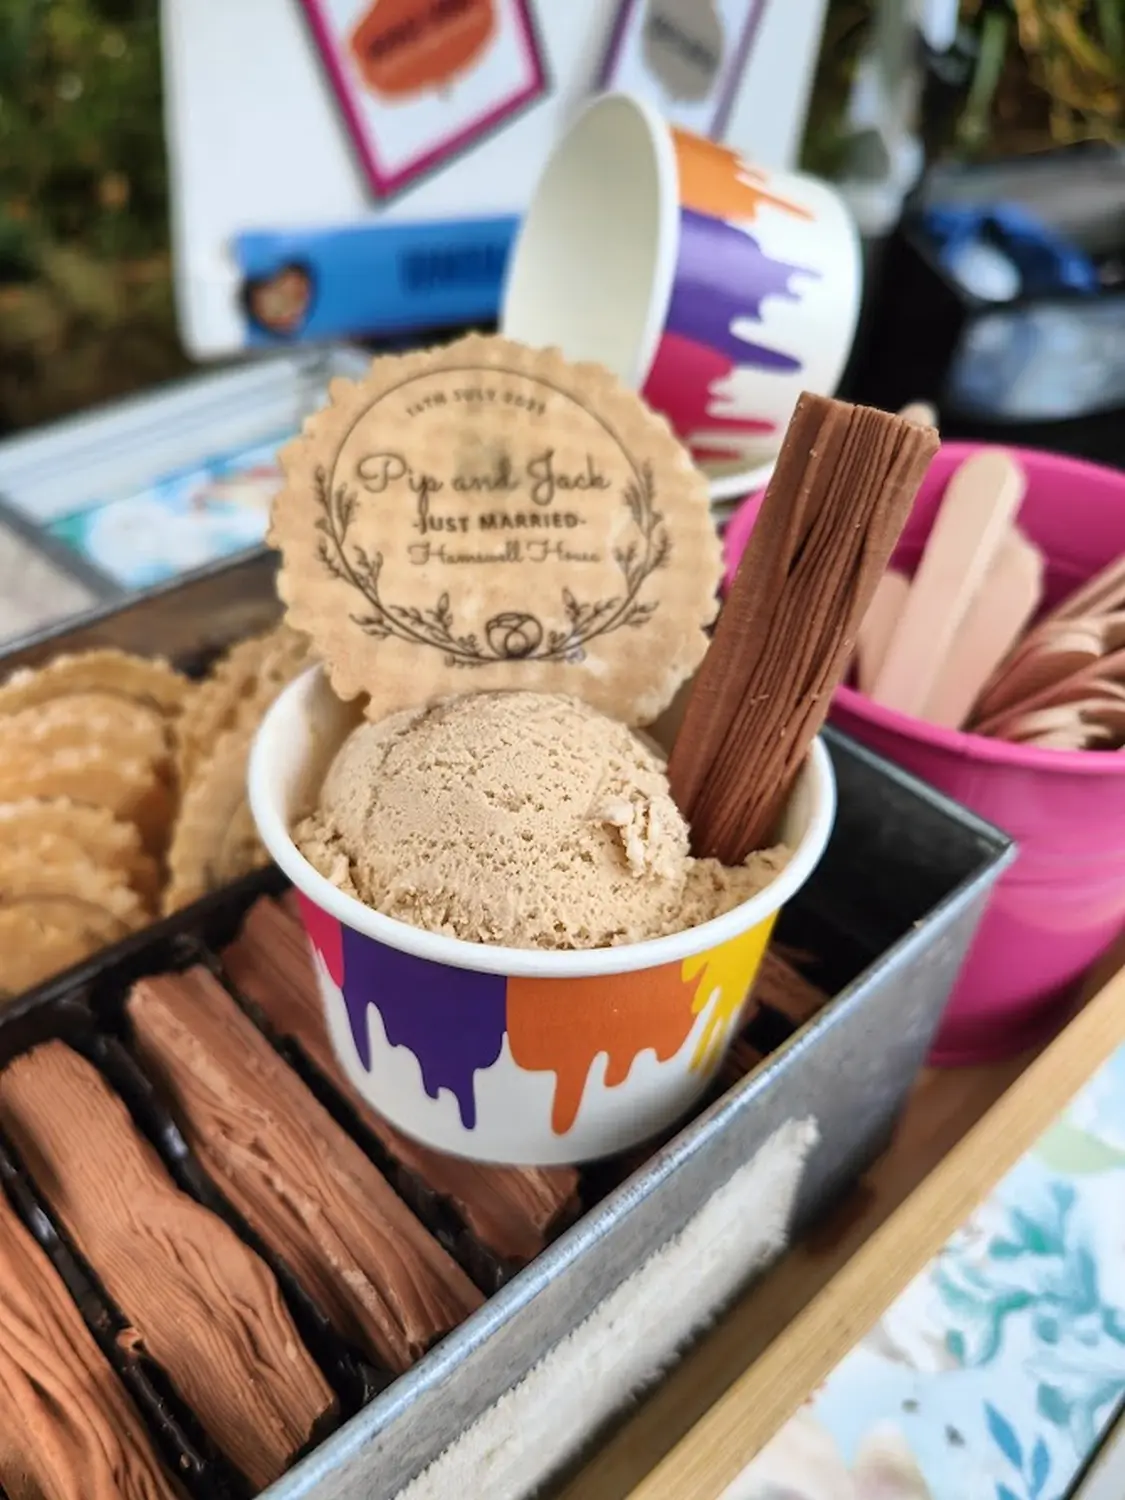 personalized Sevanetti wafers with ice cream